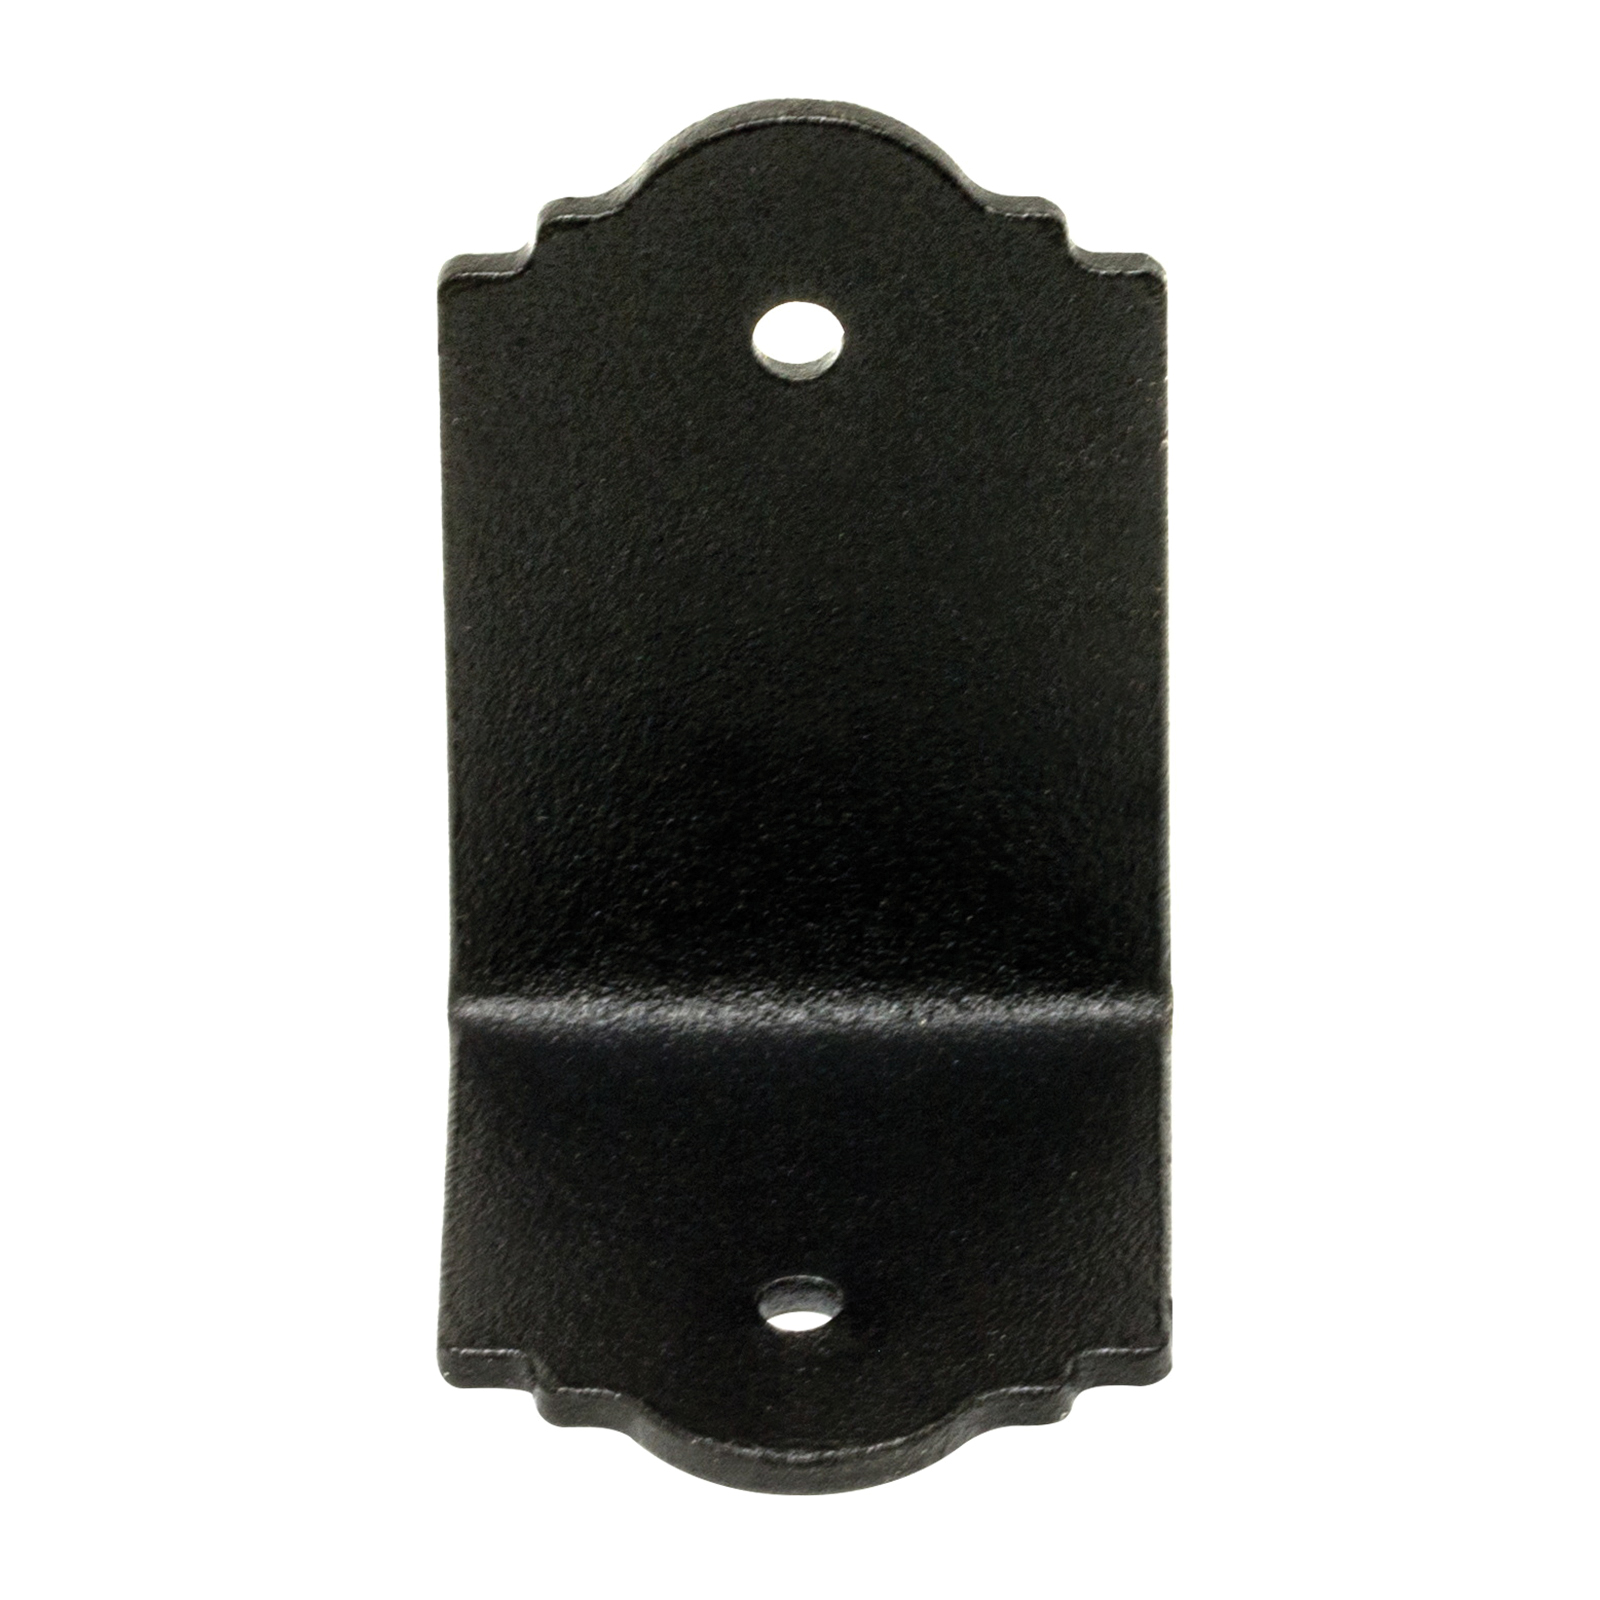 Mission APA21 90 deg Angle, 1-1/2 in W, 2 in D, 1-3/8 in H, Steel, Black, Powder-Coated